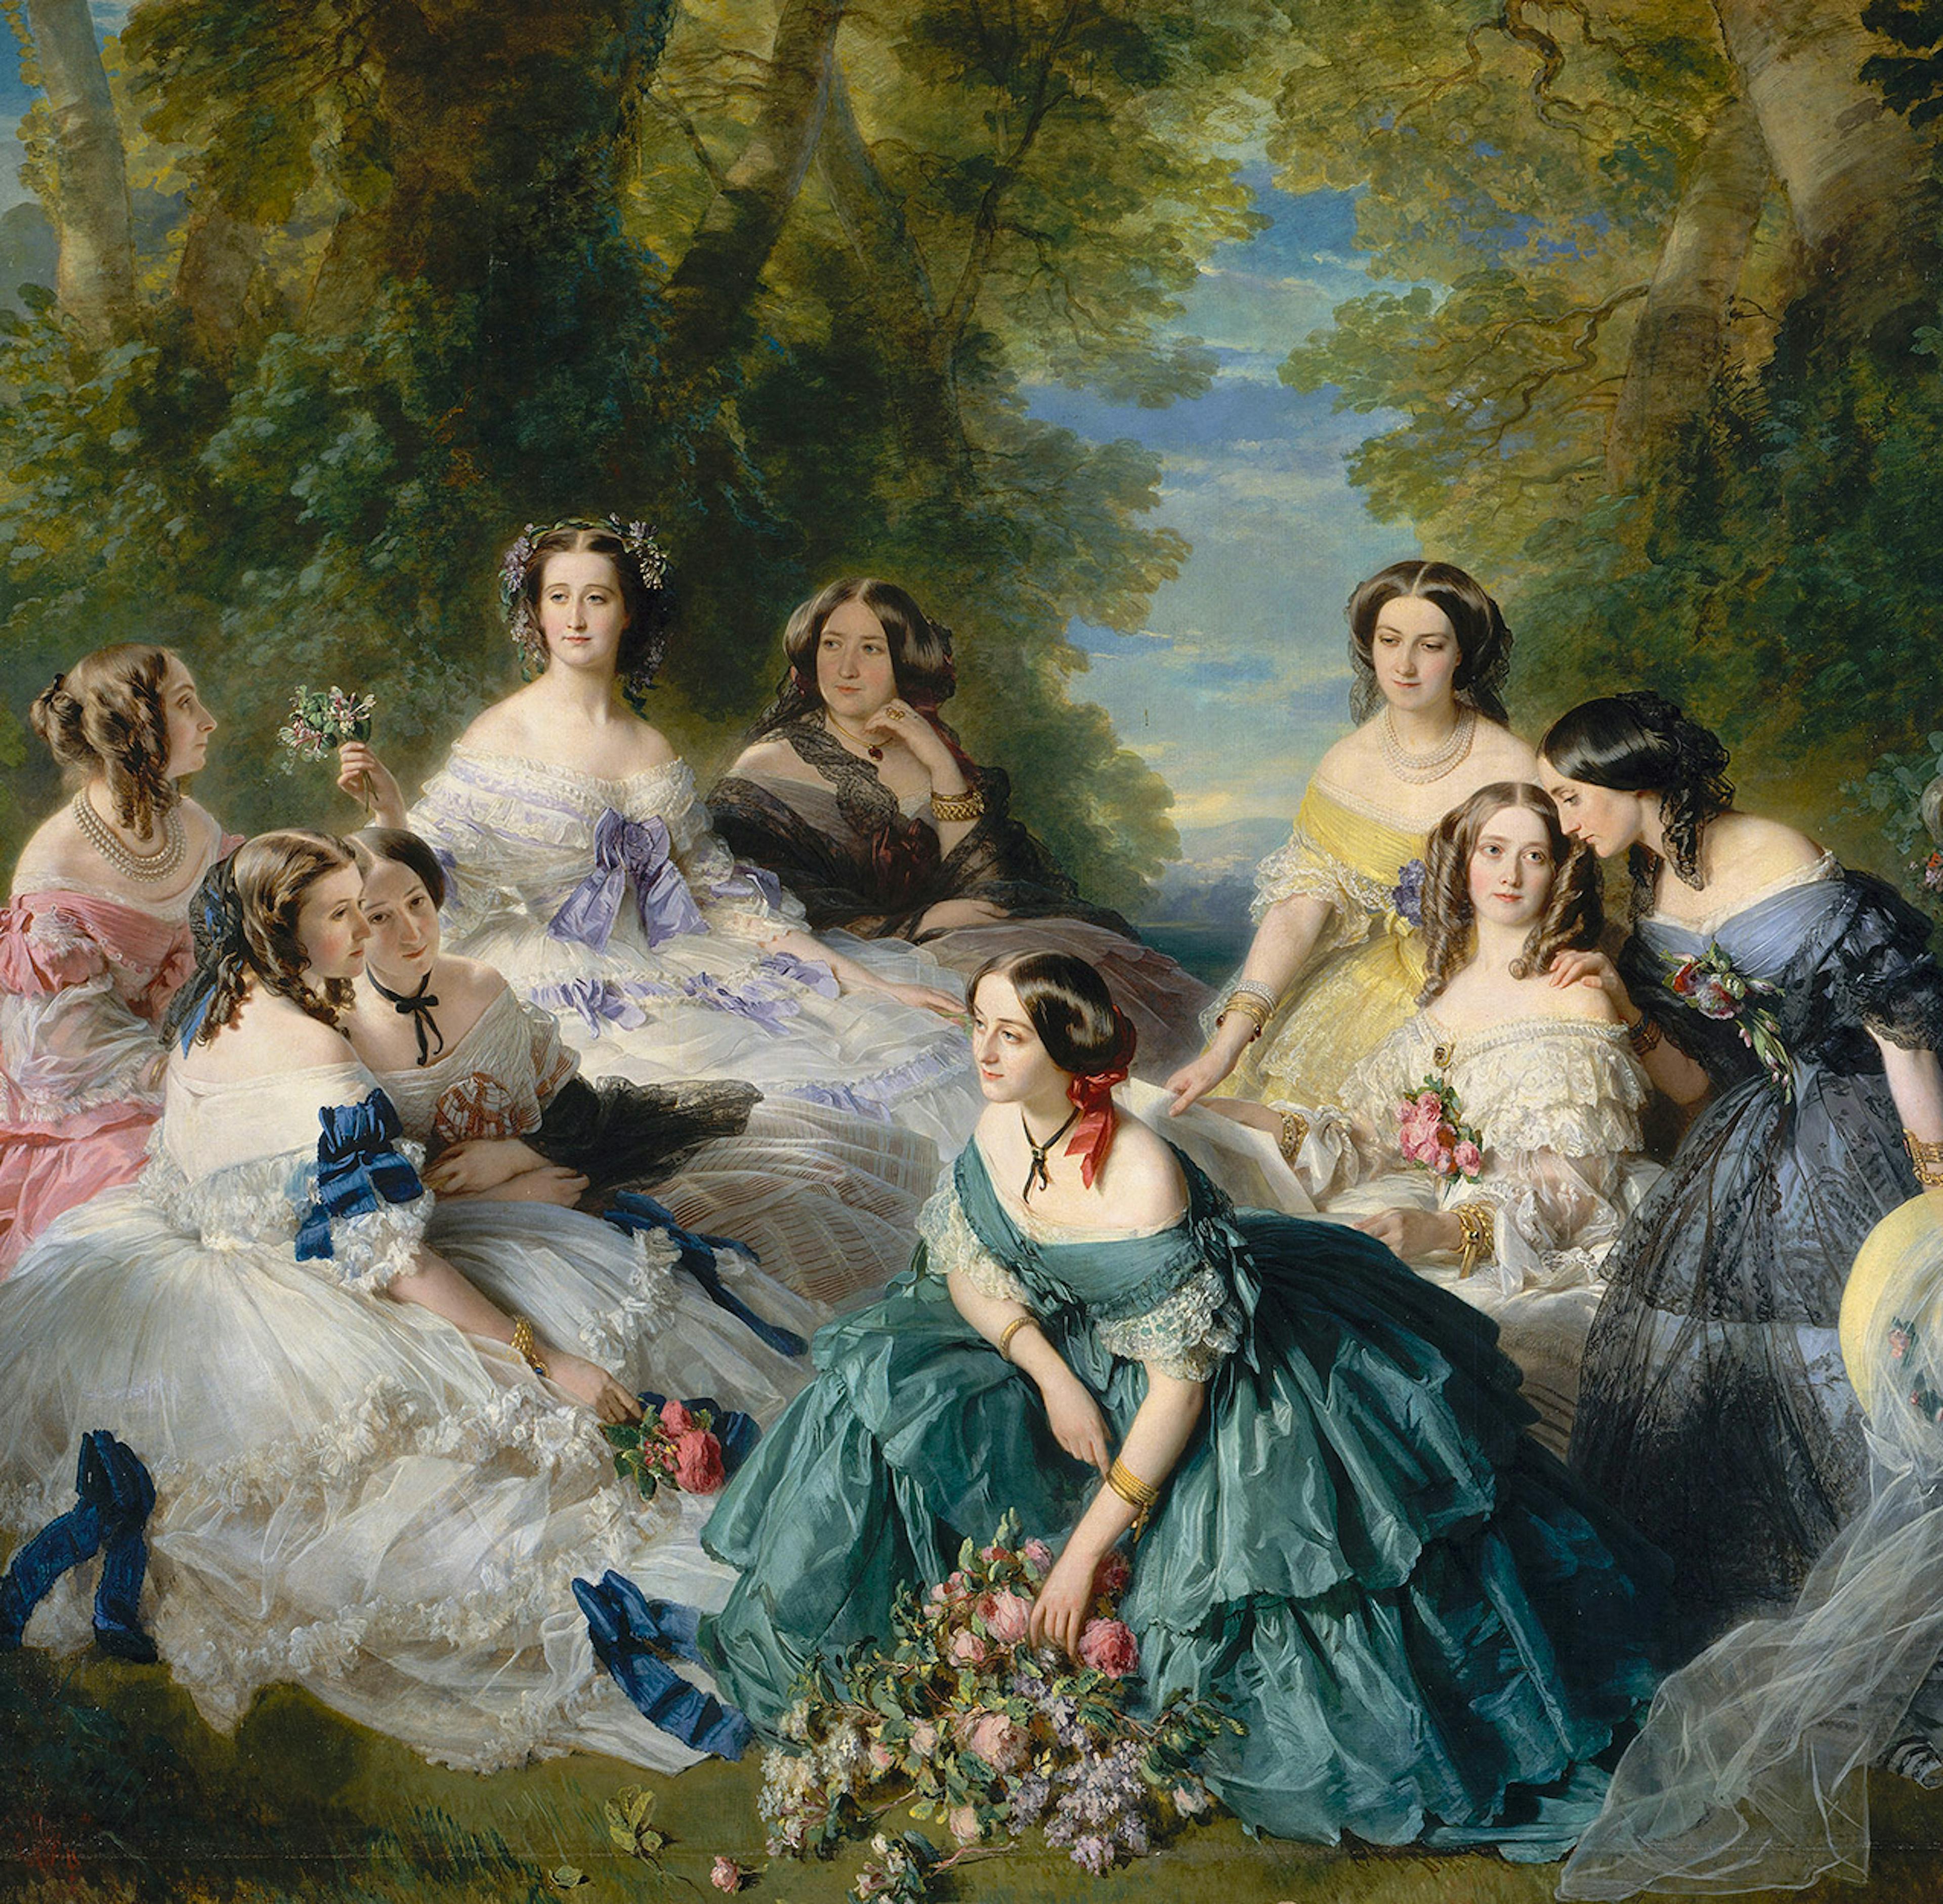 The Empress Eugénie surrounded by her ladies in waiting (1855) - Franz-Xaver Winterhalter